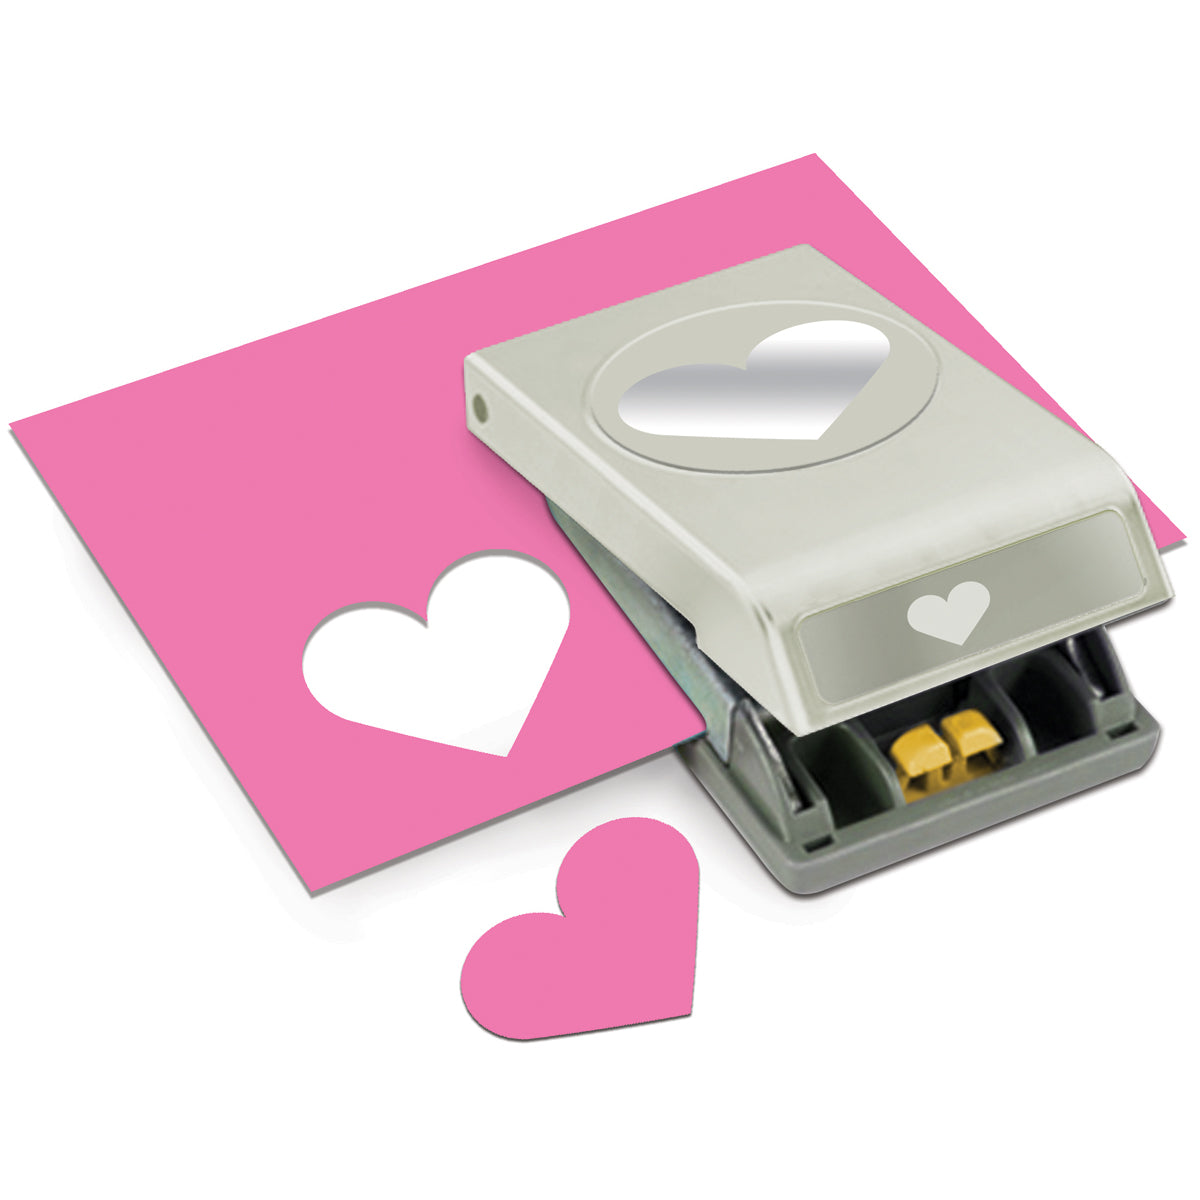  Valentine's Day 3 Pieces Heart Punch Heart Paper Hole Punch  Heart Shapes Punch 1 Inch 5/8 Inch 0.4 Inch Craft Lever Punch Handmade  Paper Punch, Mini Craft Paper Punches, Pink